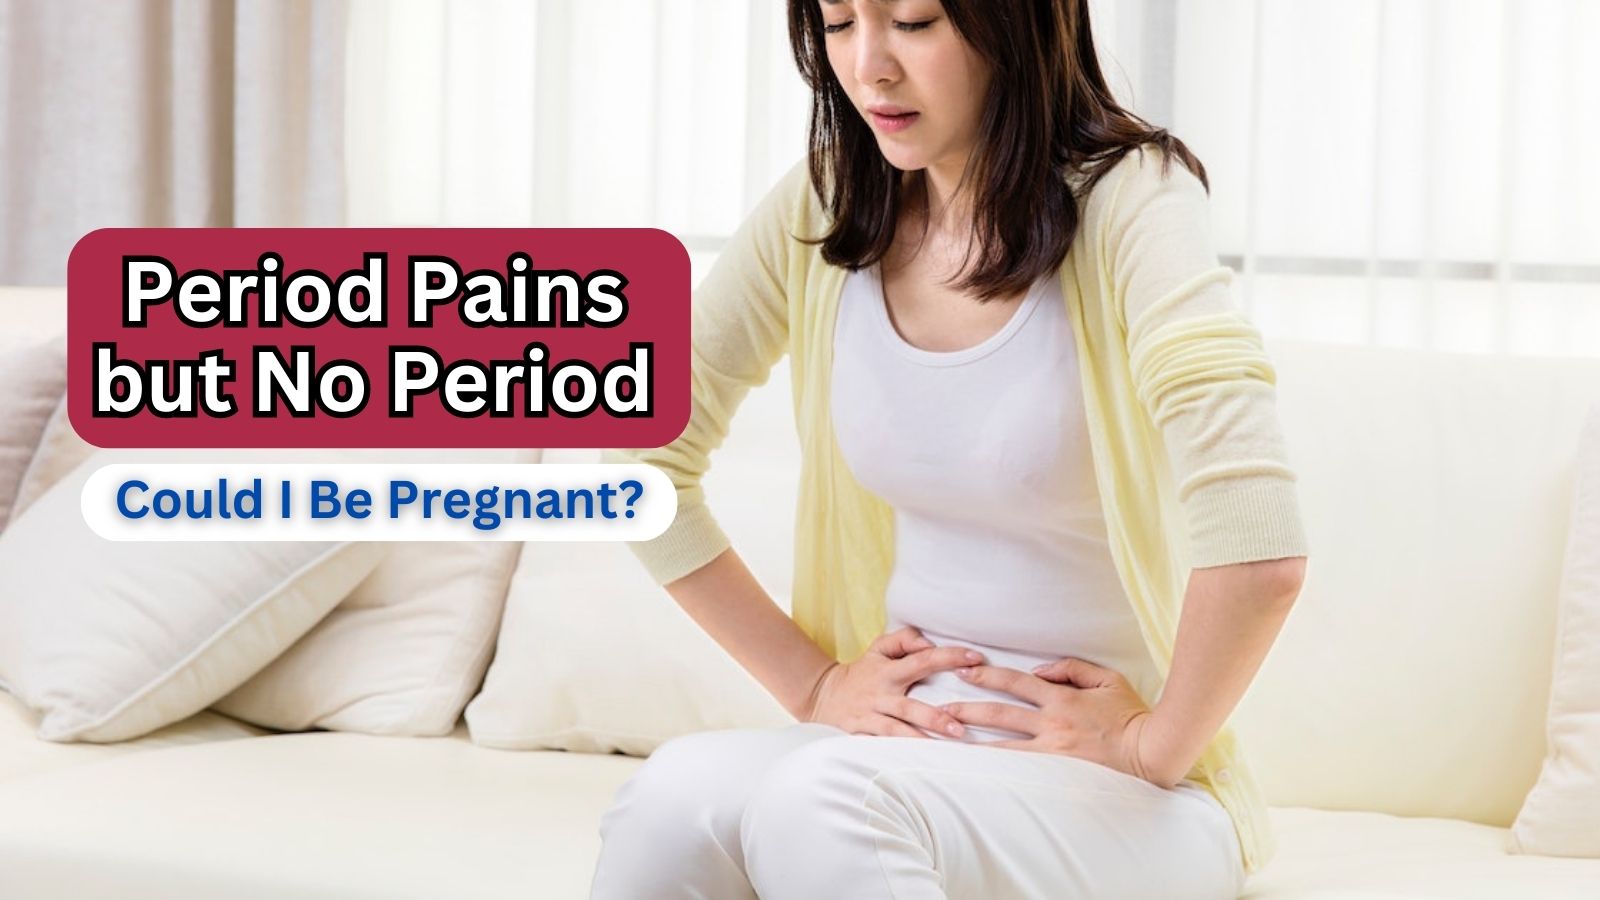 Period Pains but No Period Could I Be Pregnant?